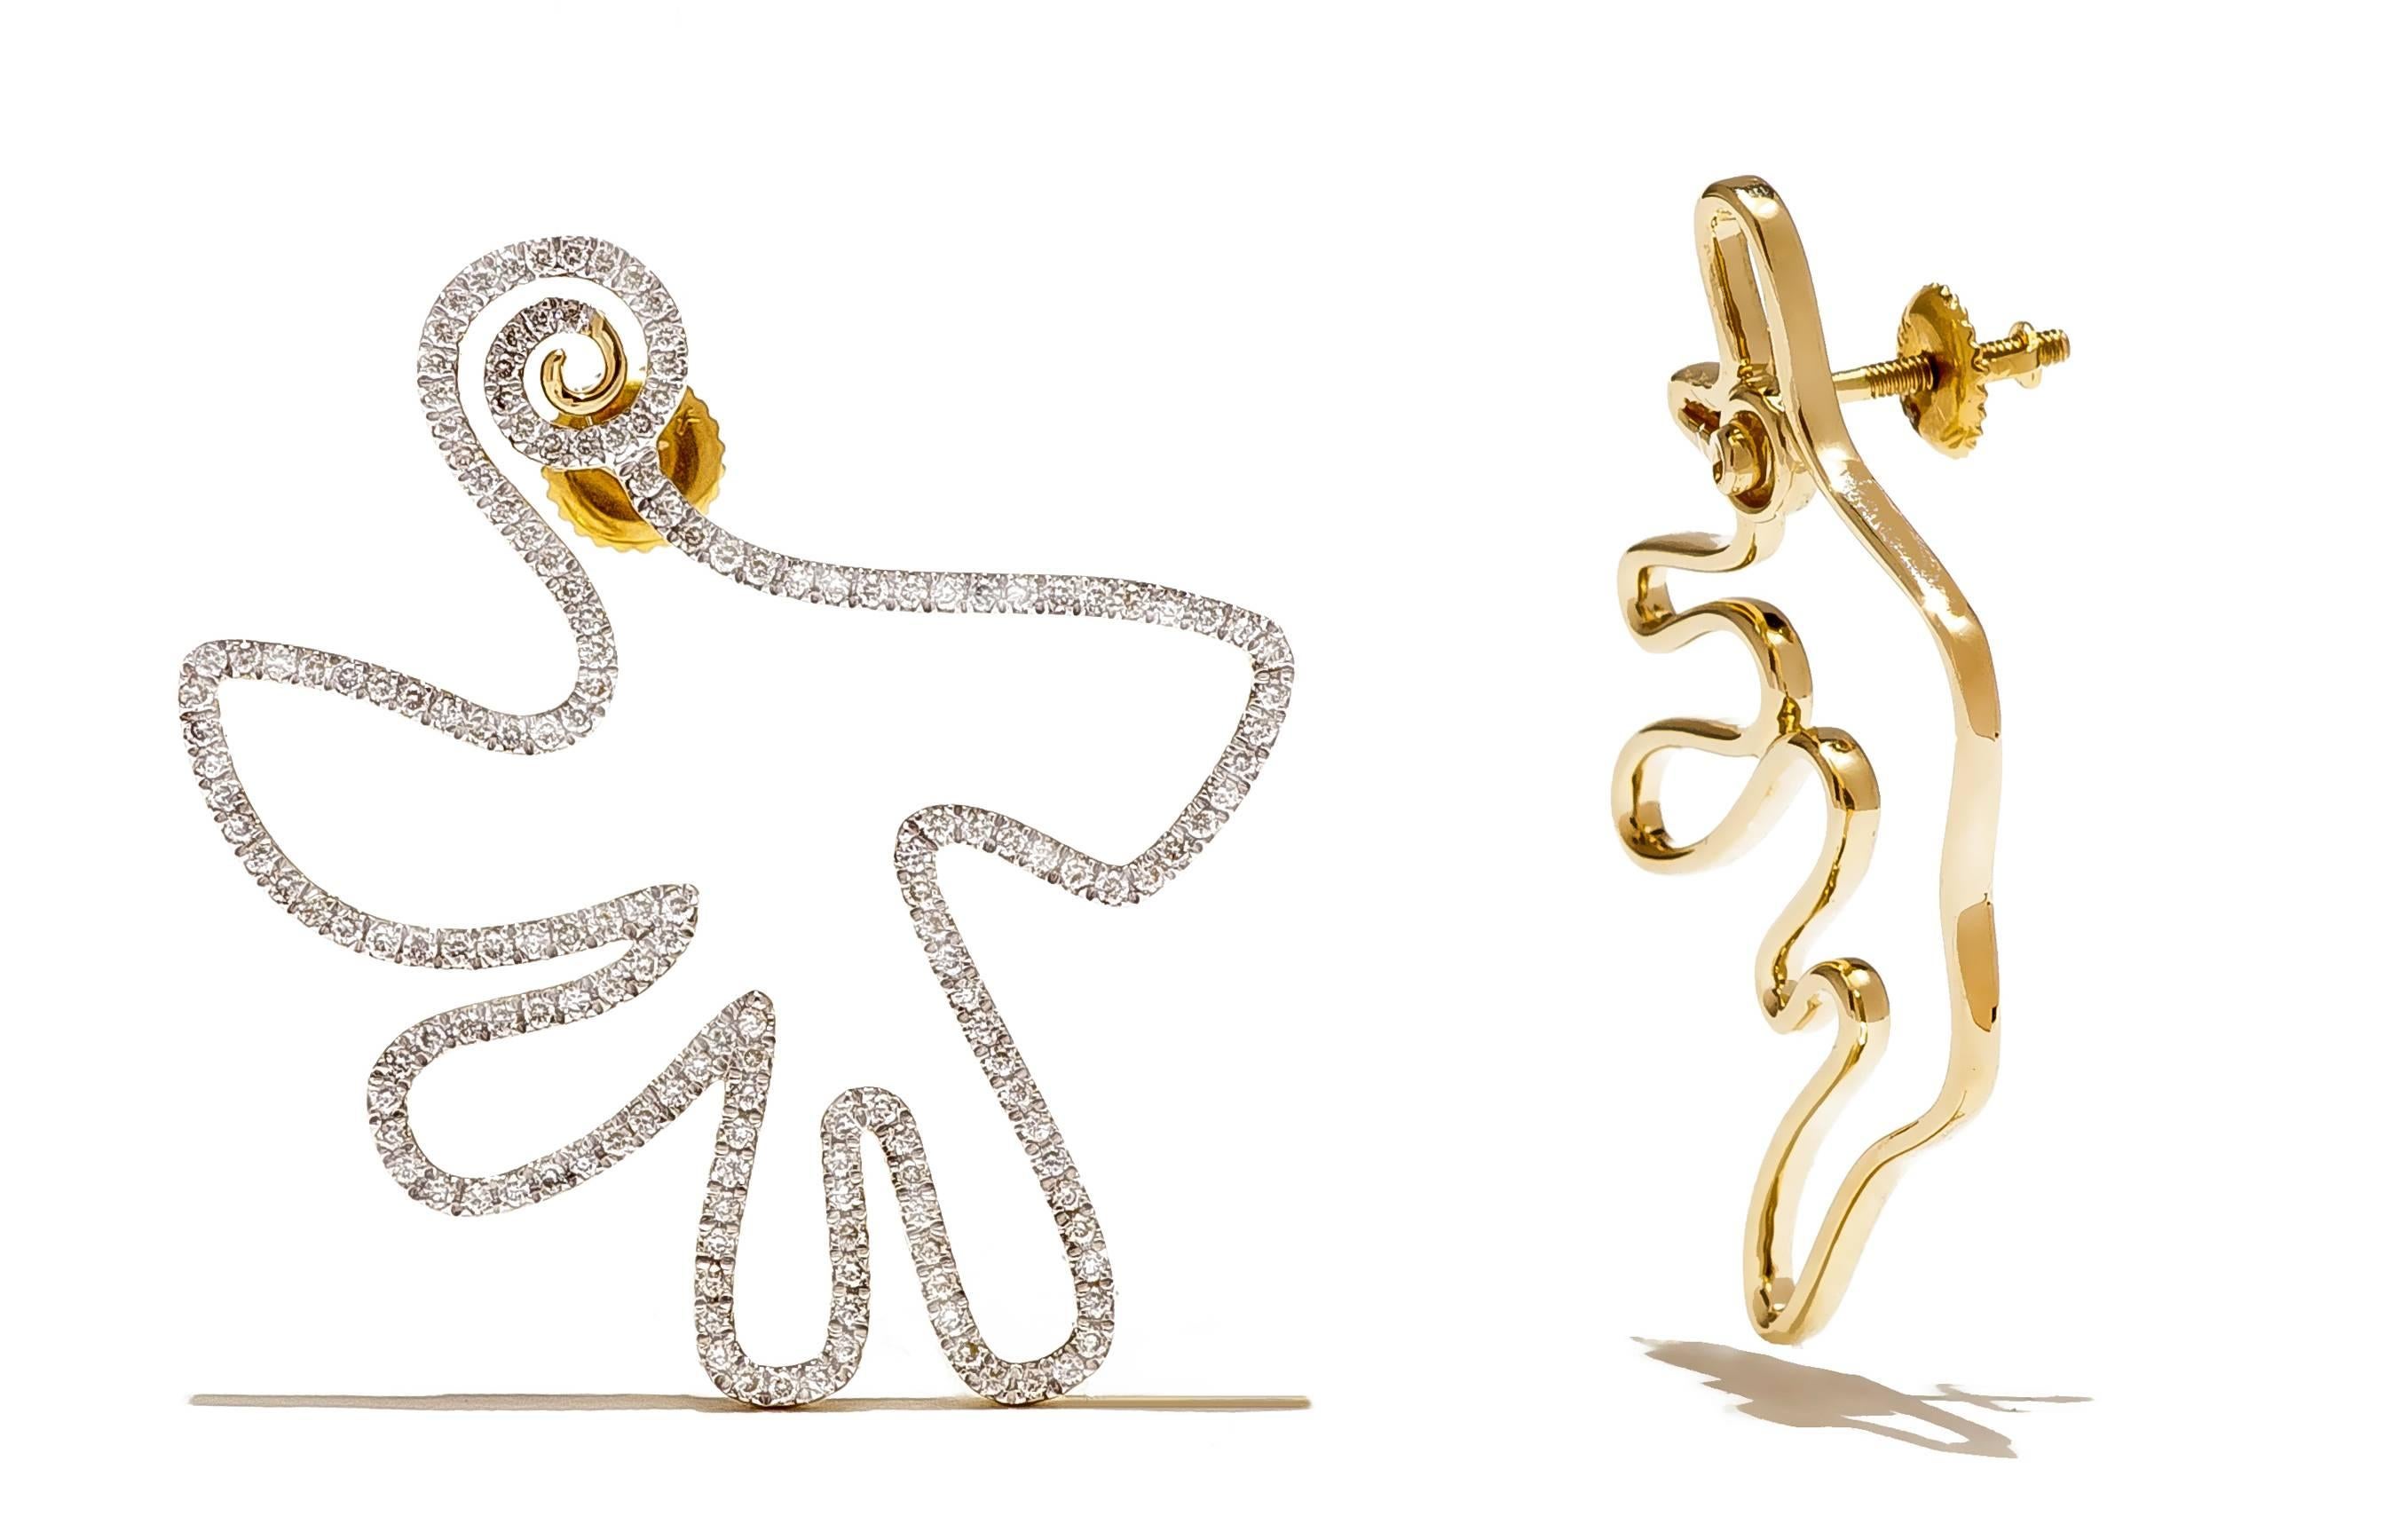 18K yellow gold, full-cut diamonds 0.91ctw. Pair of mismatched earrings. One is all-over micro-set pave diamonds, the other is yellow gold metal only. Each one has a different irregular undulating shape and are complimentary to each other. They are